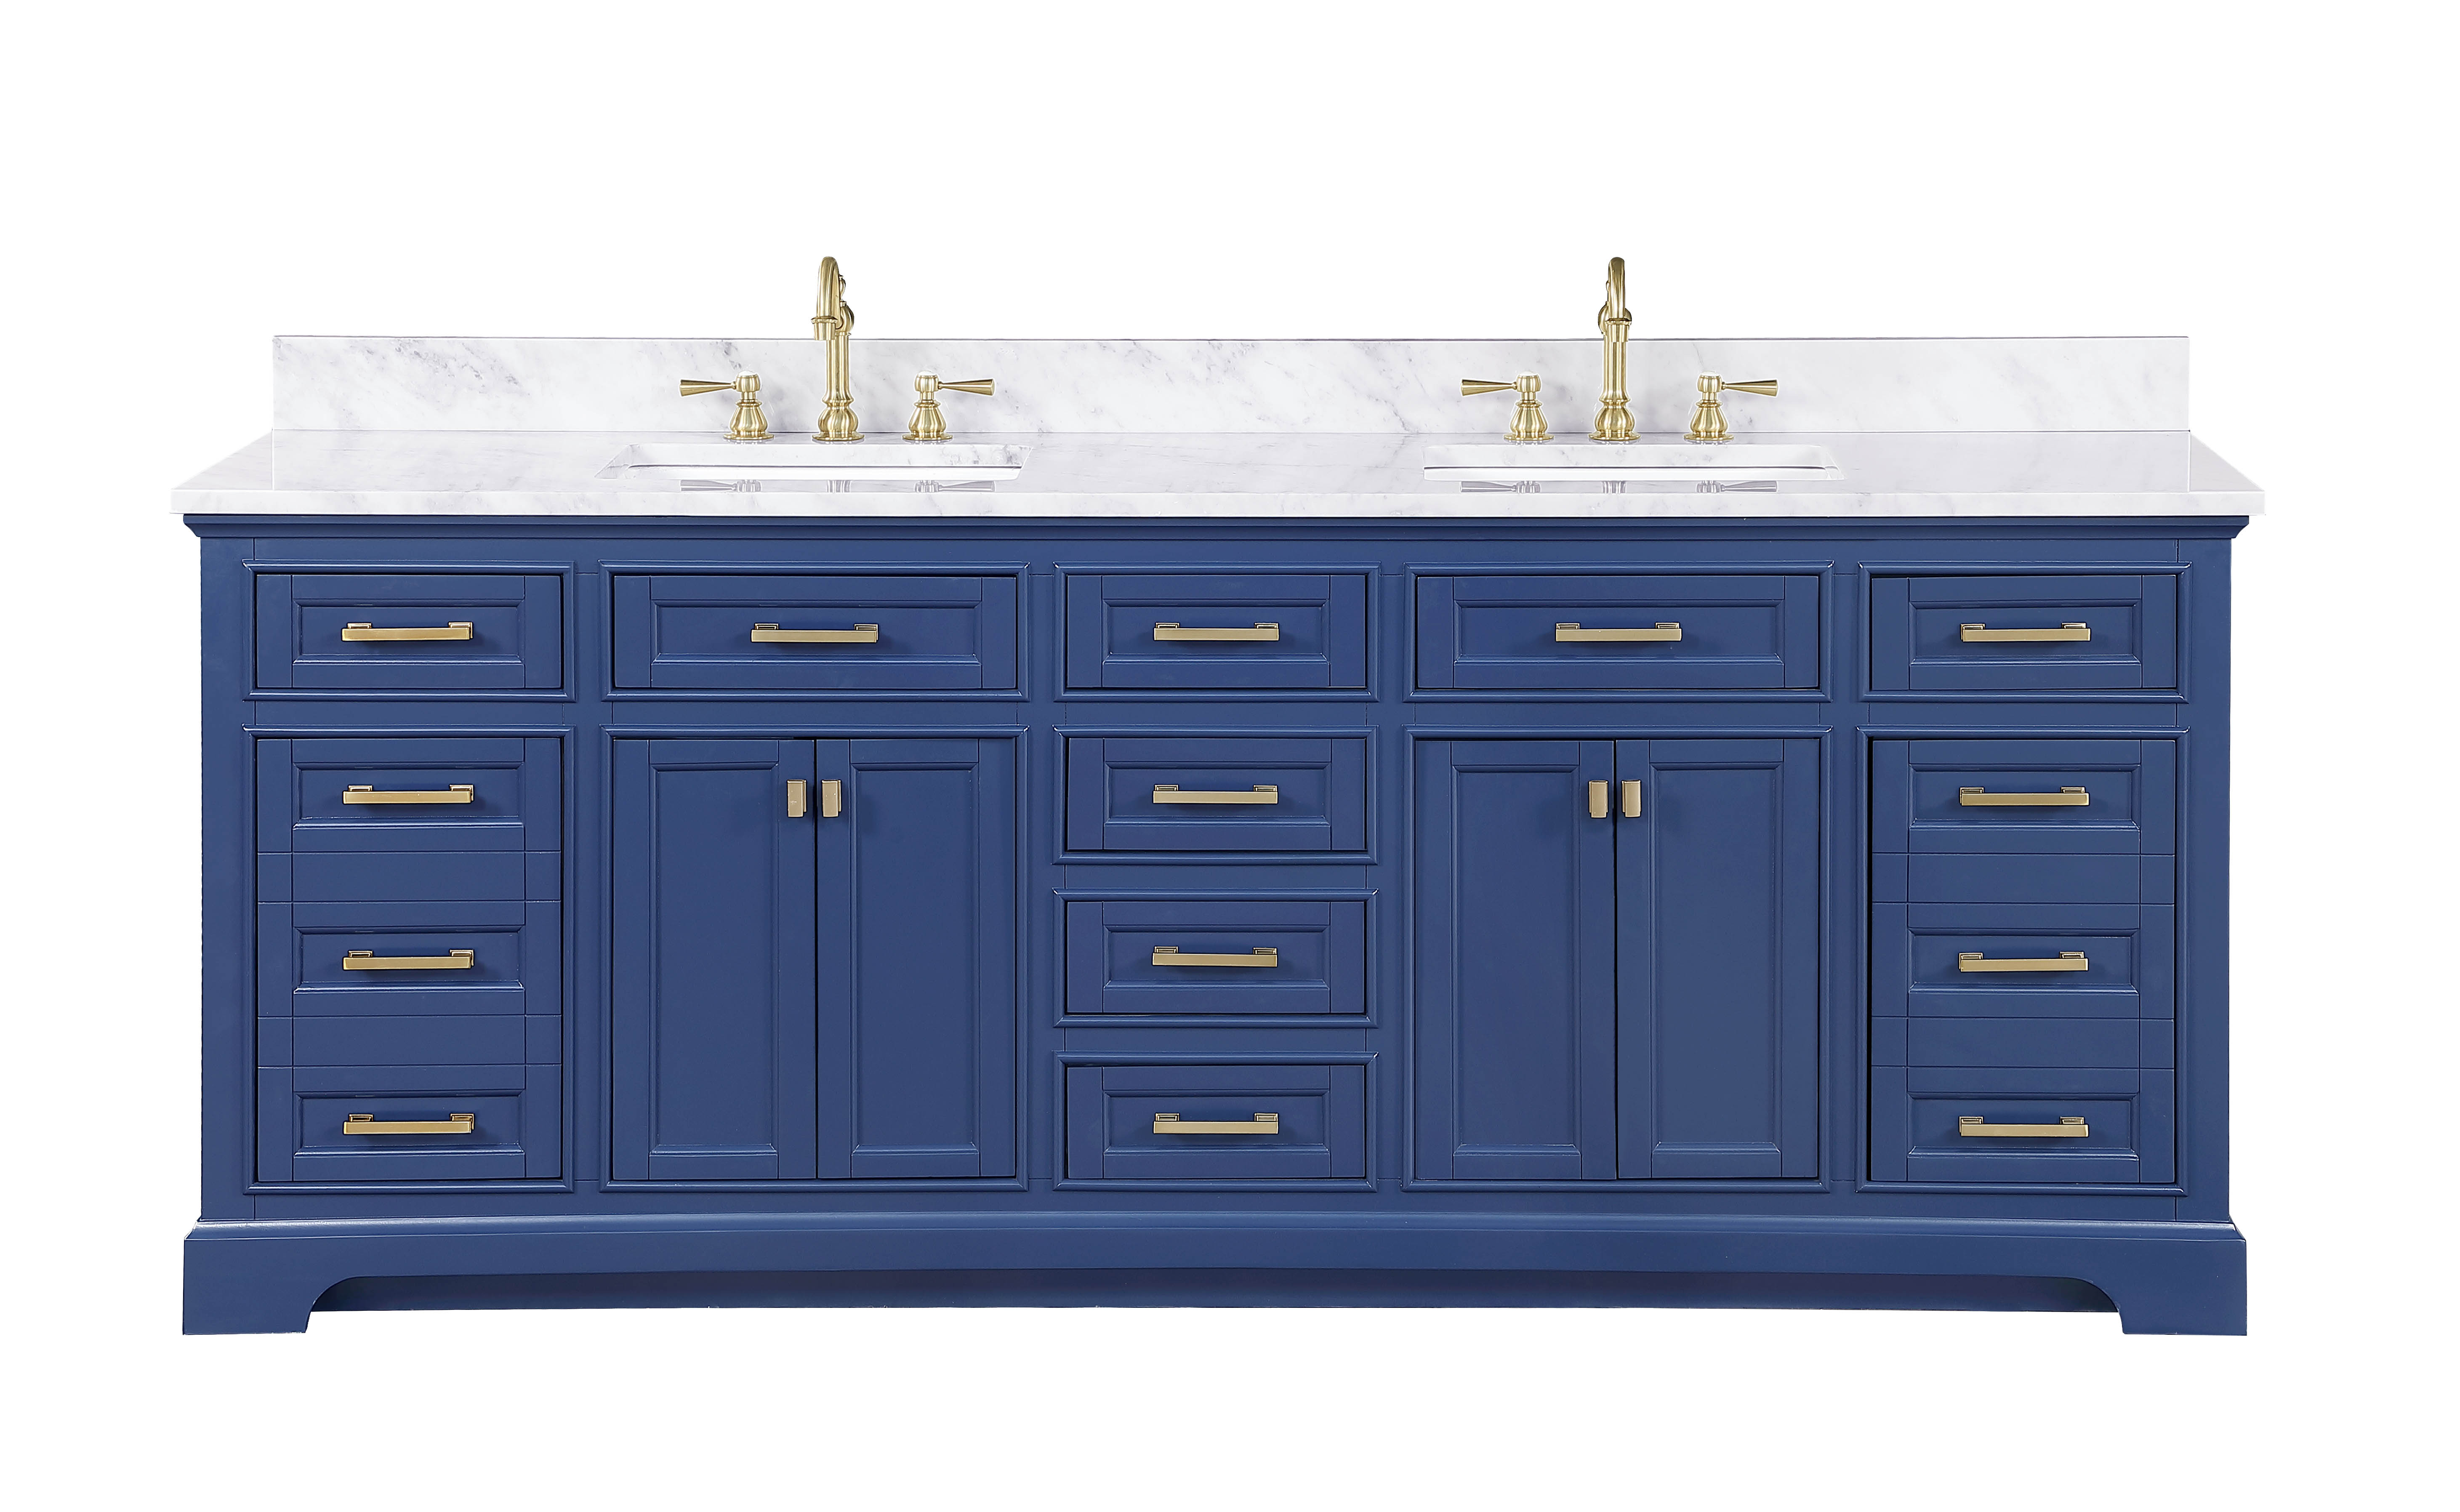 Transitional 84" Double Sink Vanity with Carrara Marble Counterop in Blue Finish